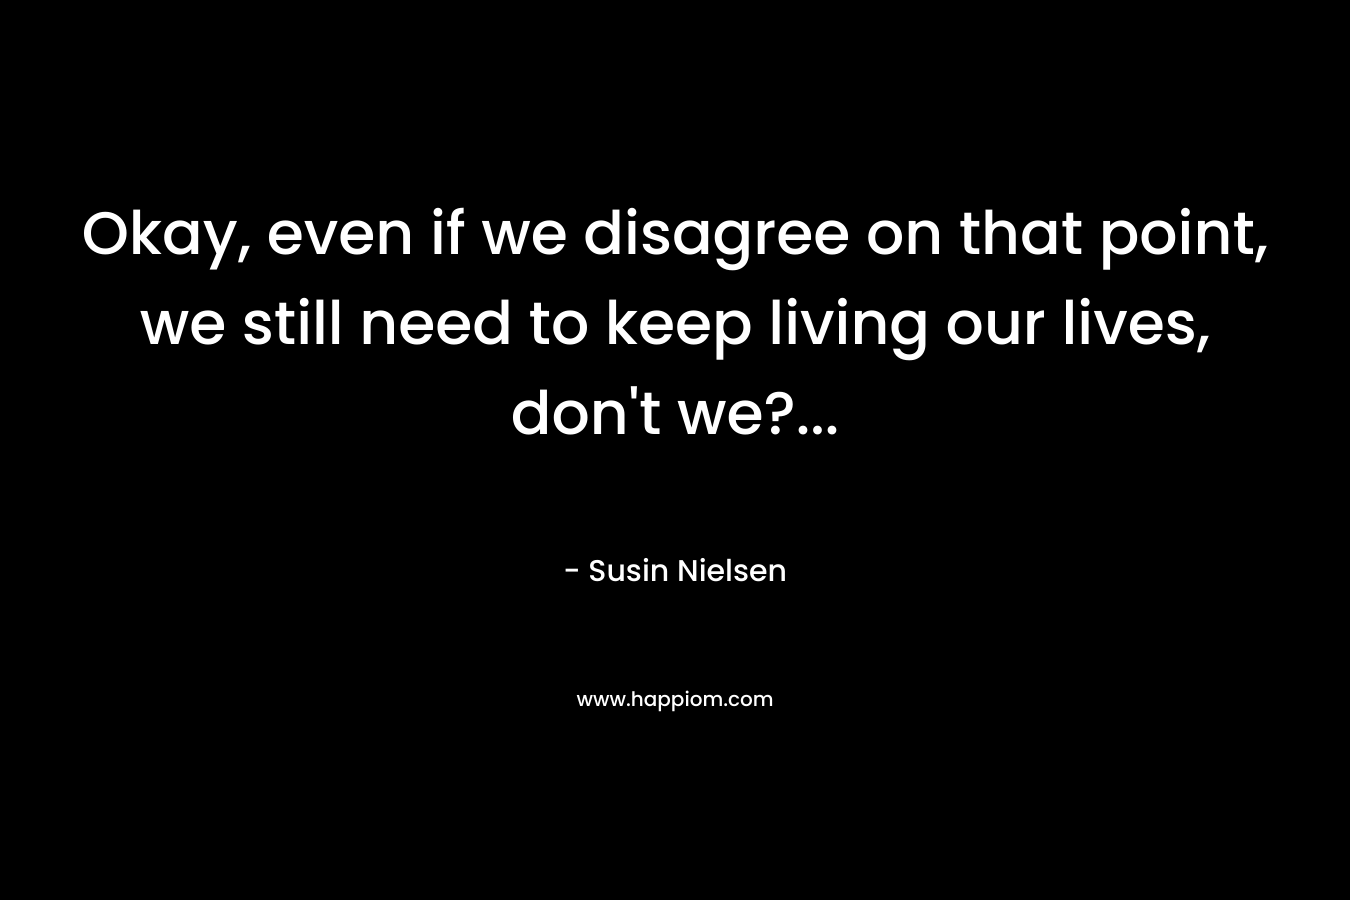 Okay, even if we disagree on that point, we still need to keep living our lives, don't we?...